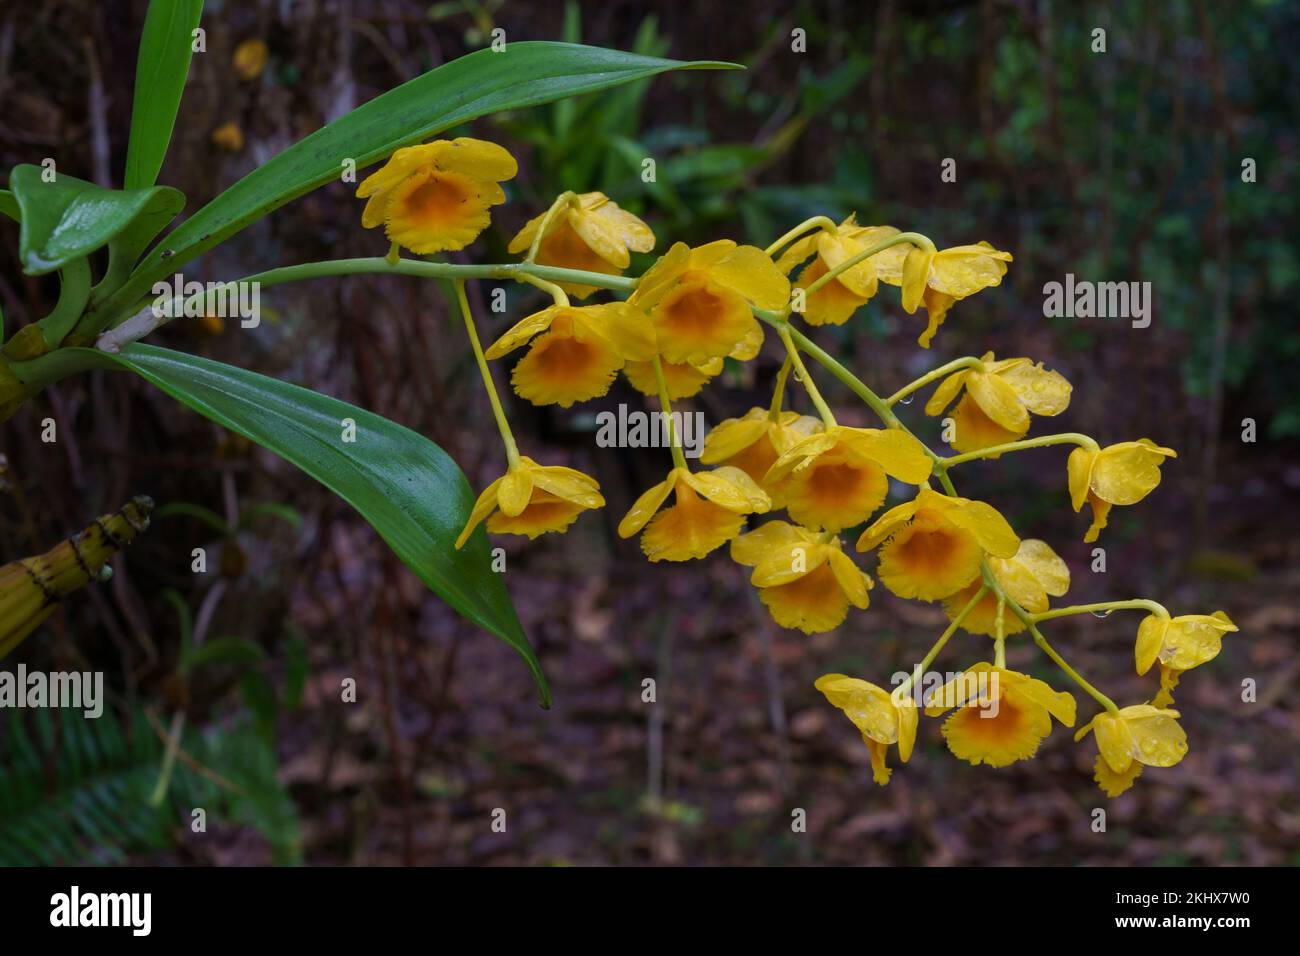 Closeup view of yellow and orange cluster of flowers of tropical epiphytic orchid species dendrobium chrysotoxum outdoors on natural background Stock Photo